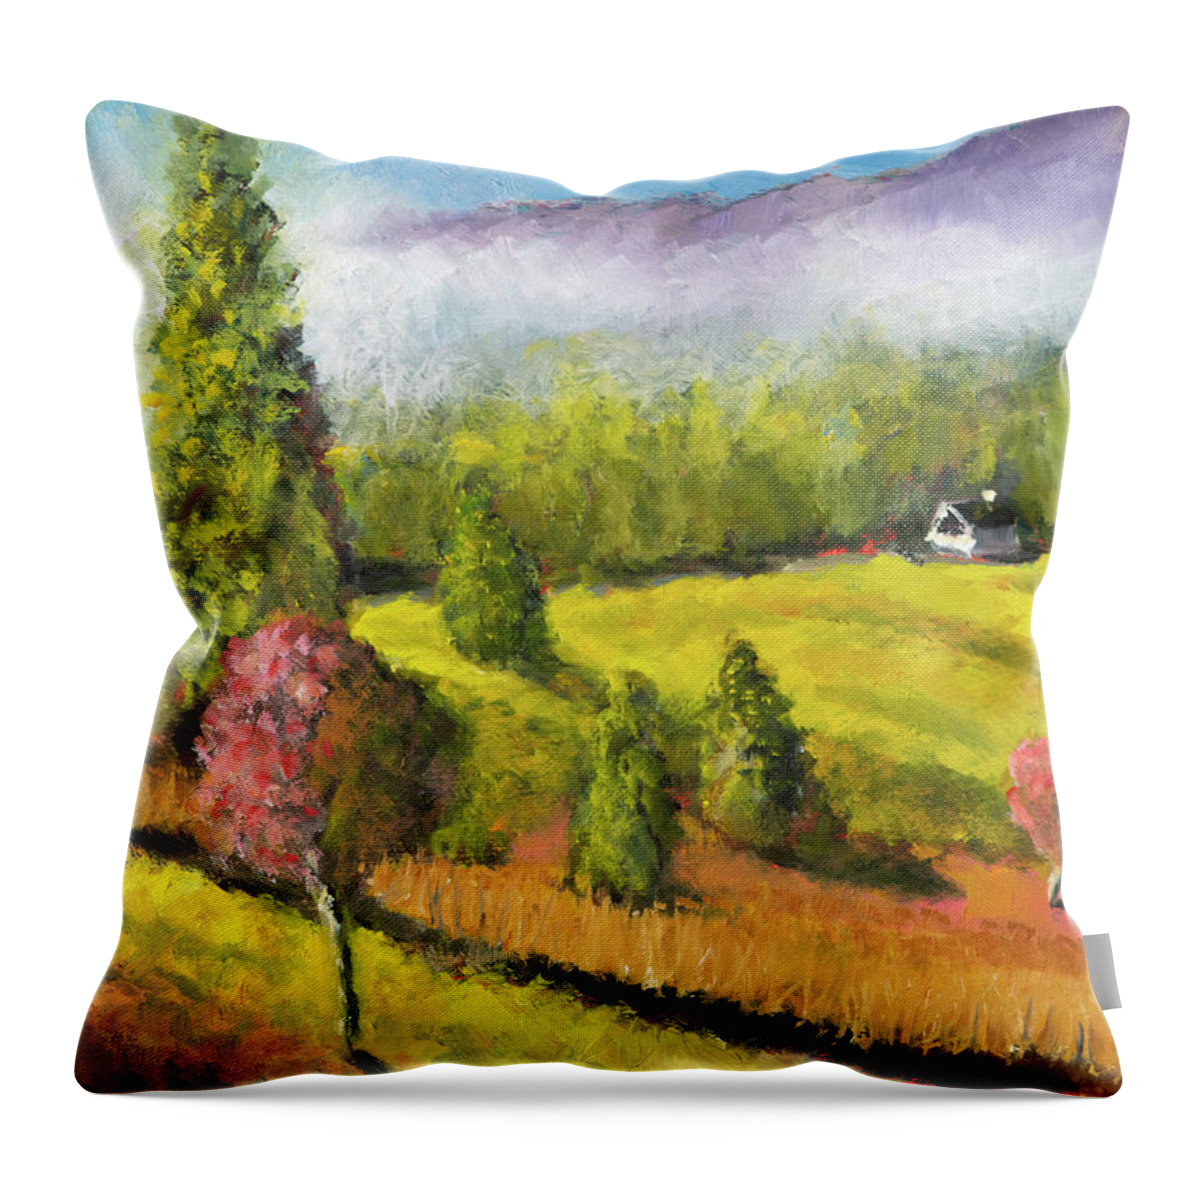 Ft Hoskins Throw Pillow featuring the painting Ft Hoskins by Mike Bergen